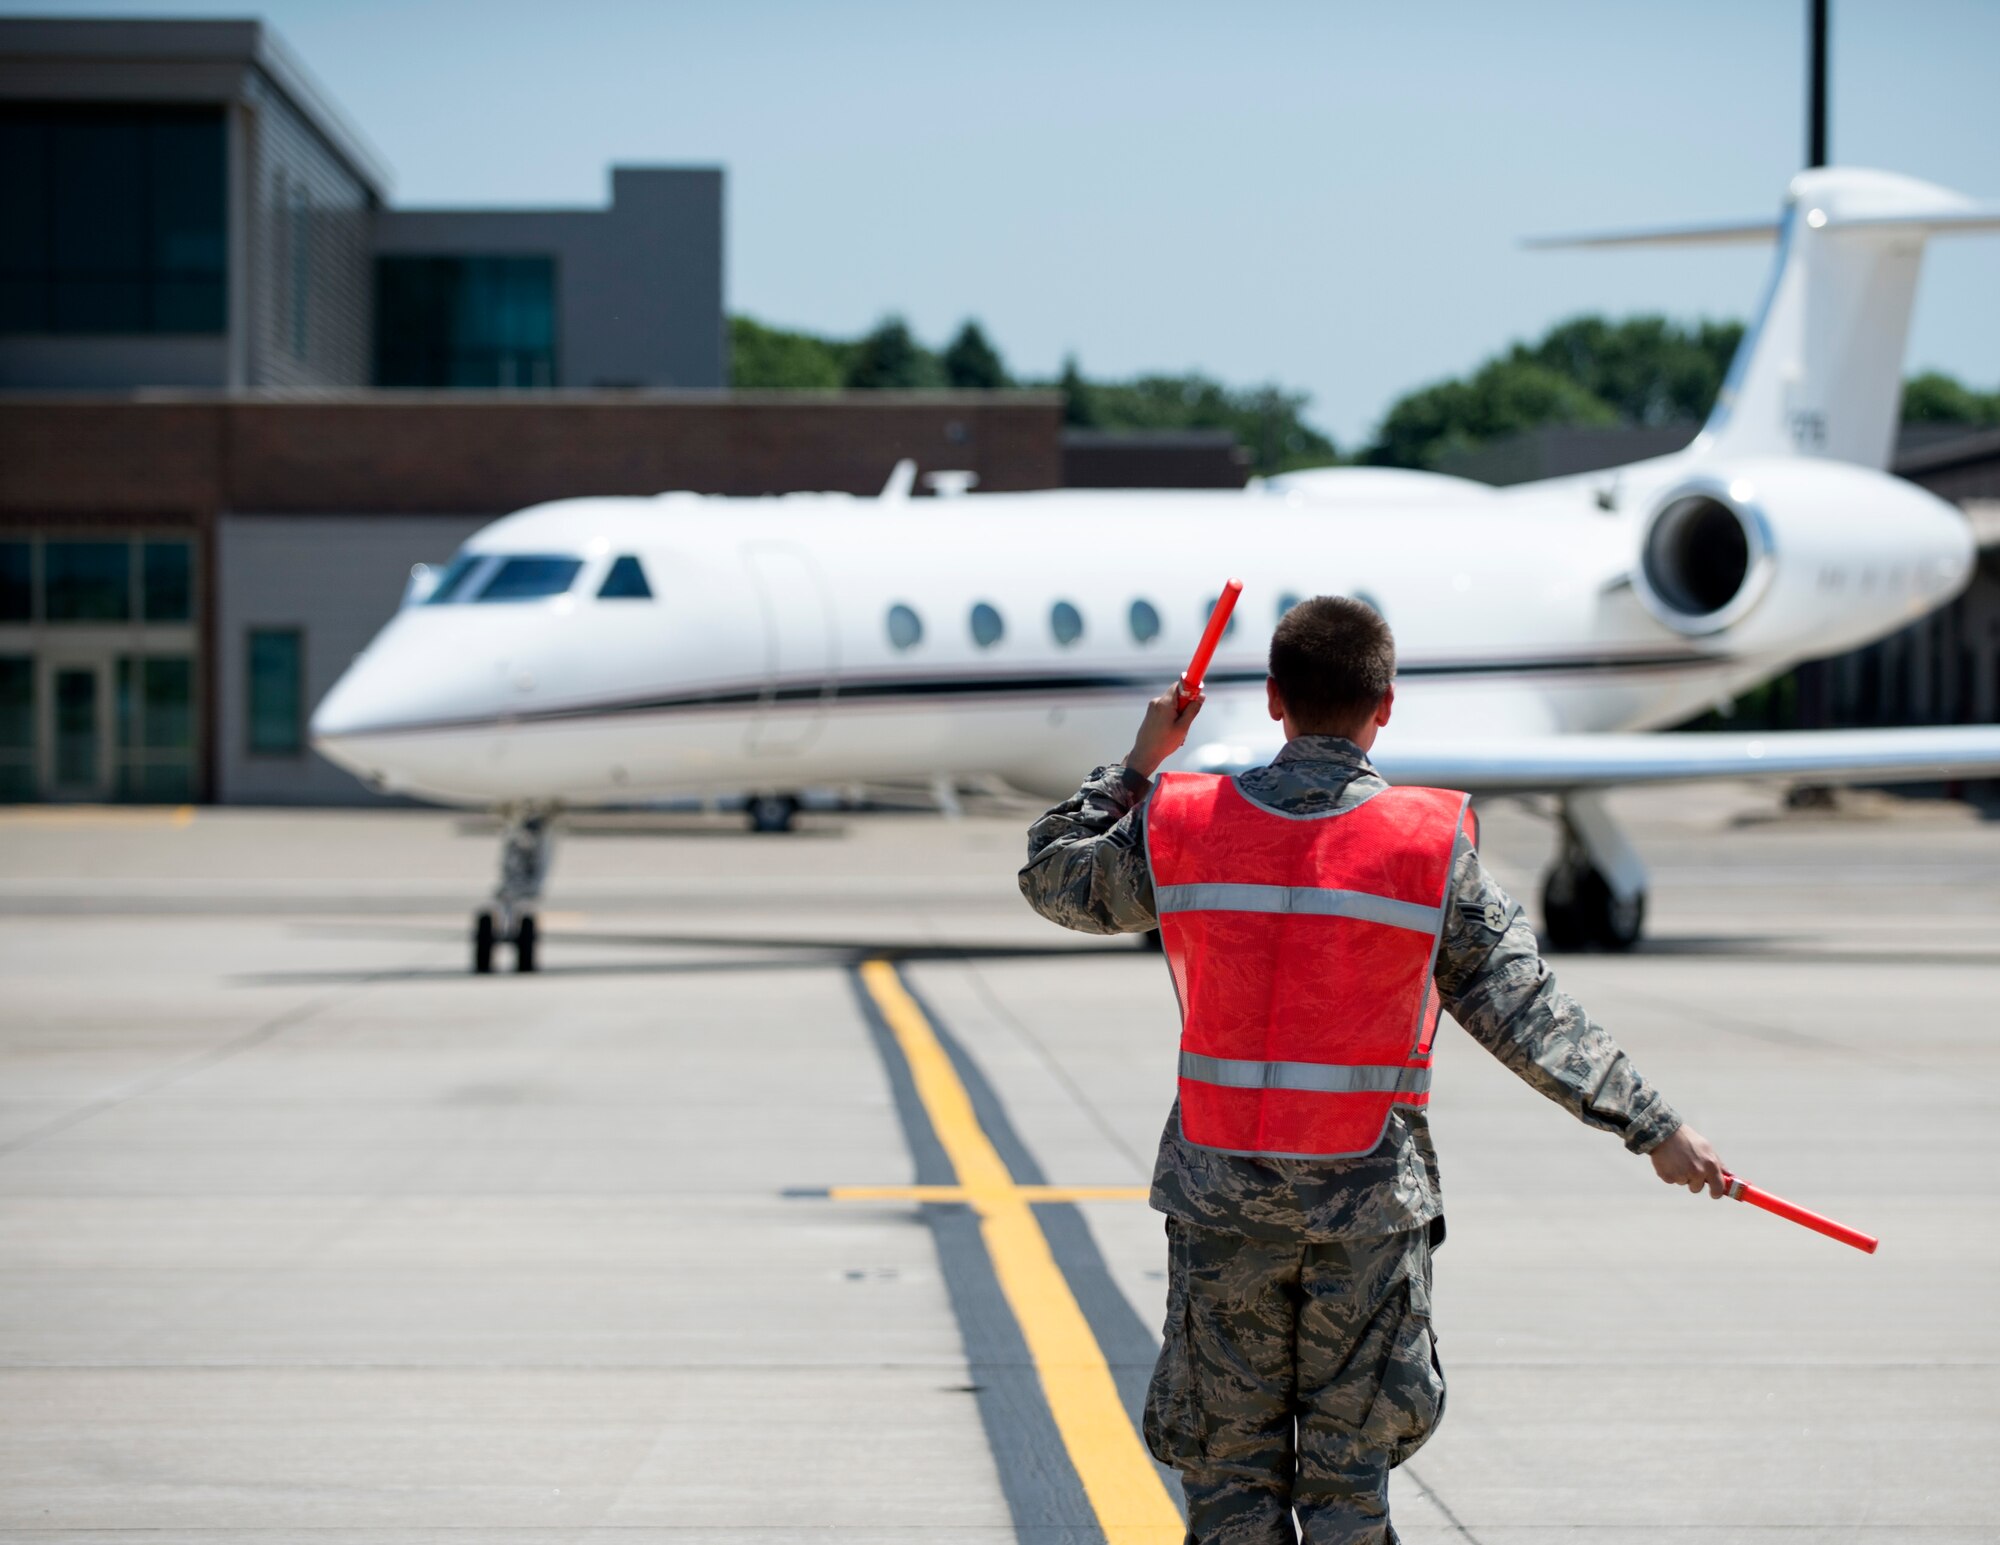 U.S. Air Force Airman from the 133rd Aircraft Maintenance Squadron marshals U.S. Air Force U.S. Air Force Gen. Joseph L. Lengyel, Chief of the National Guard Bureau, aircraft into position in St. Paul, Minn., June 17, 2020.